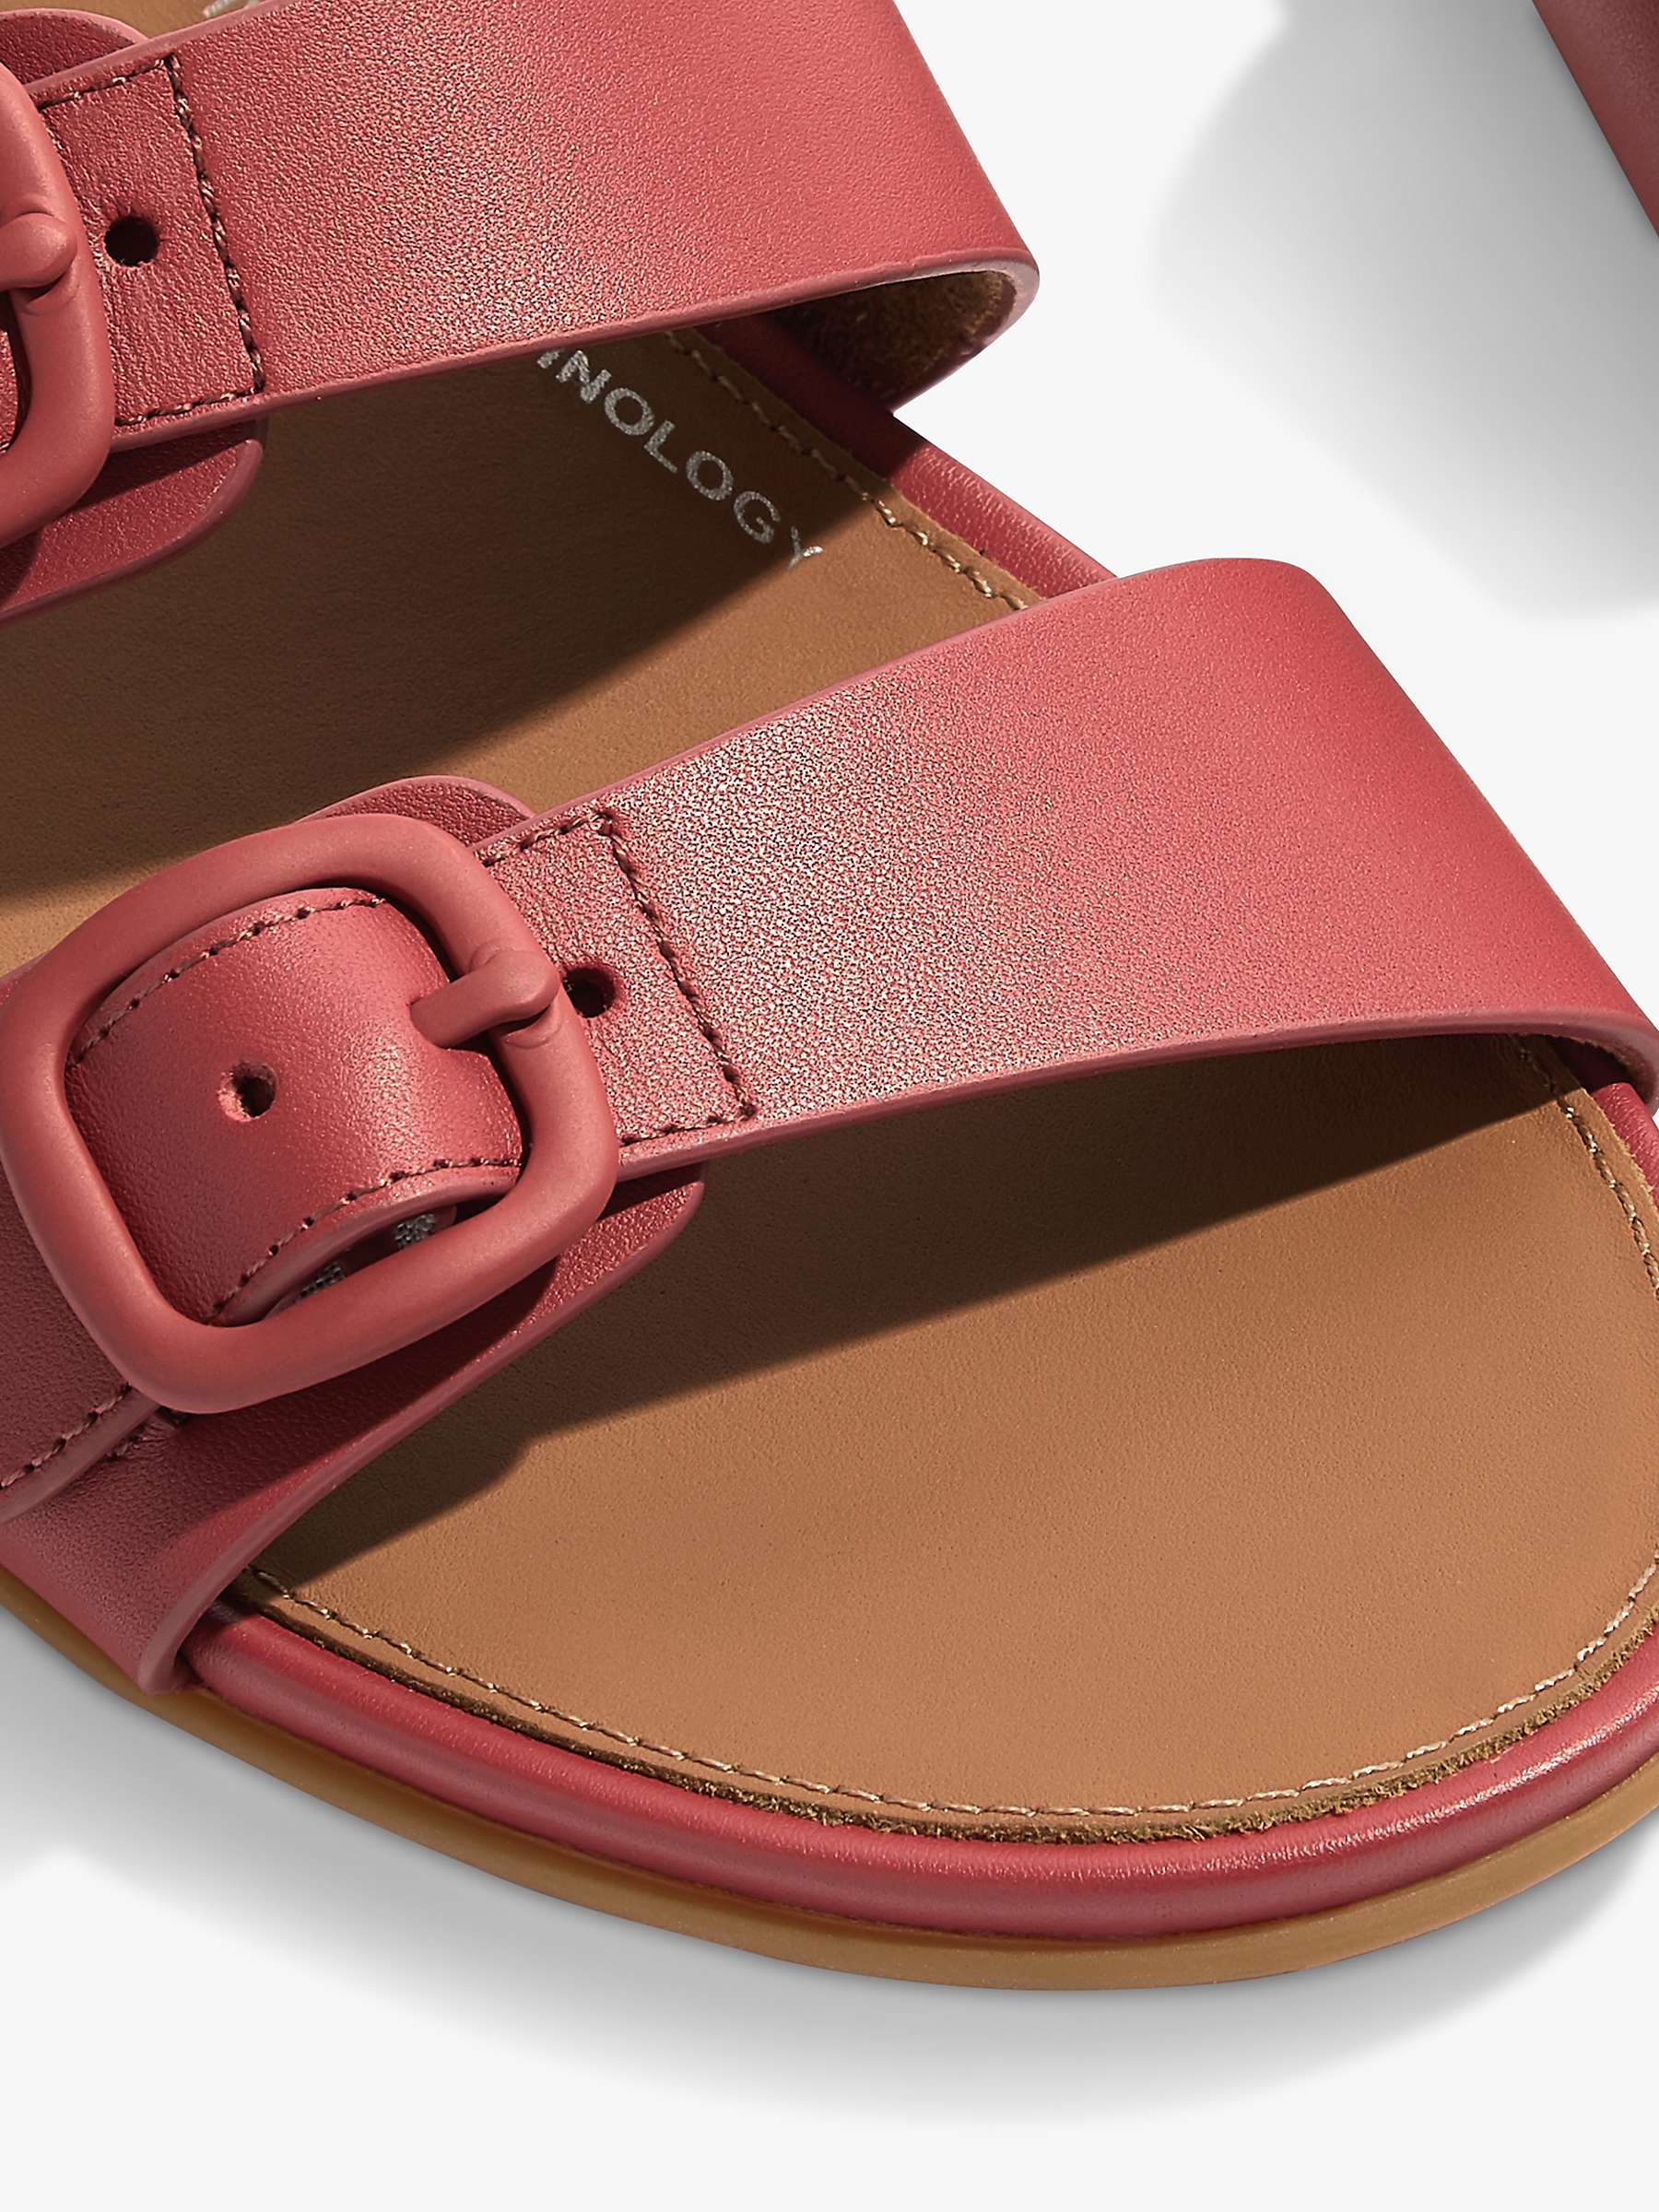 Buy FitFlop Gracie Leather Sliders Online at johnlewis.com